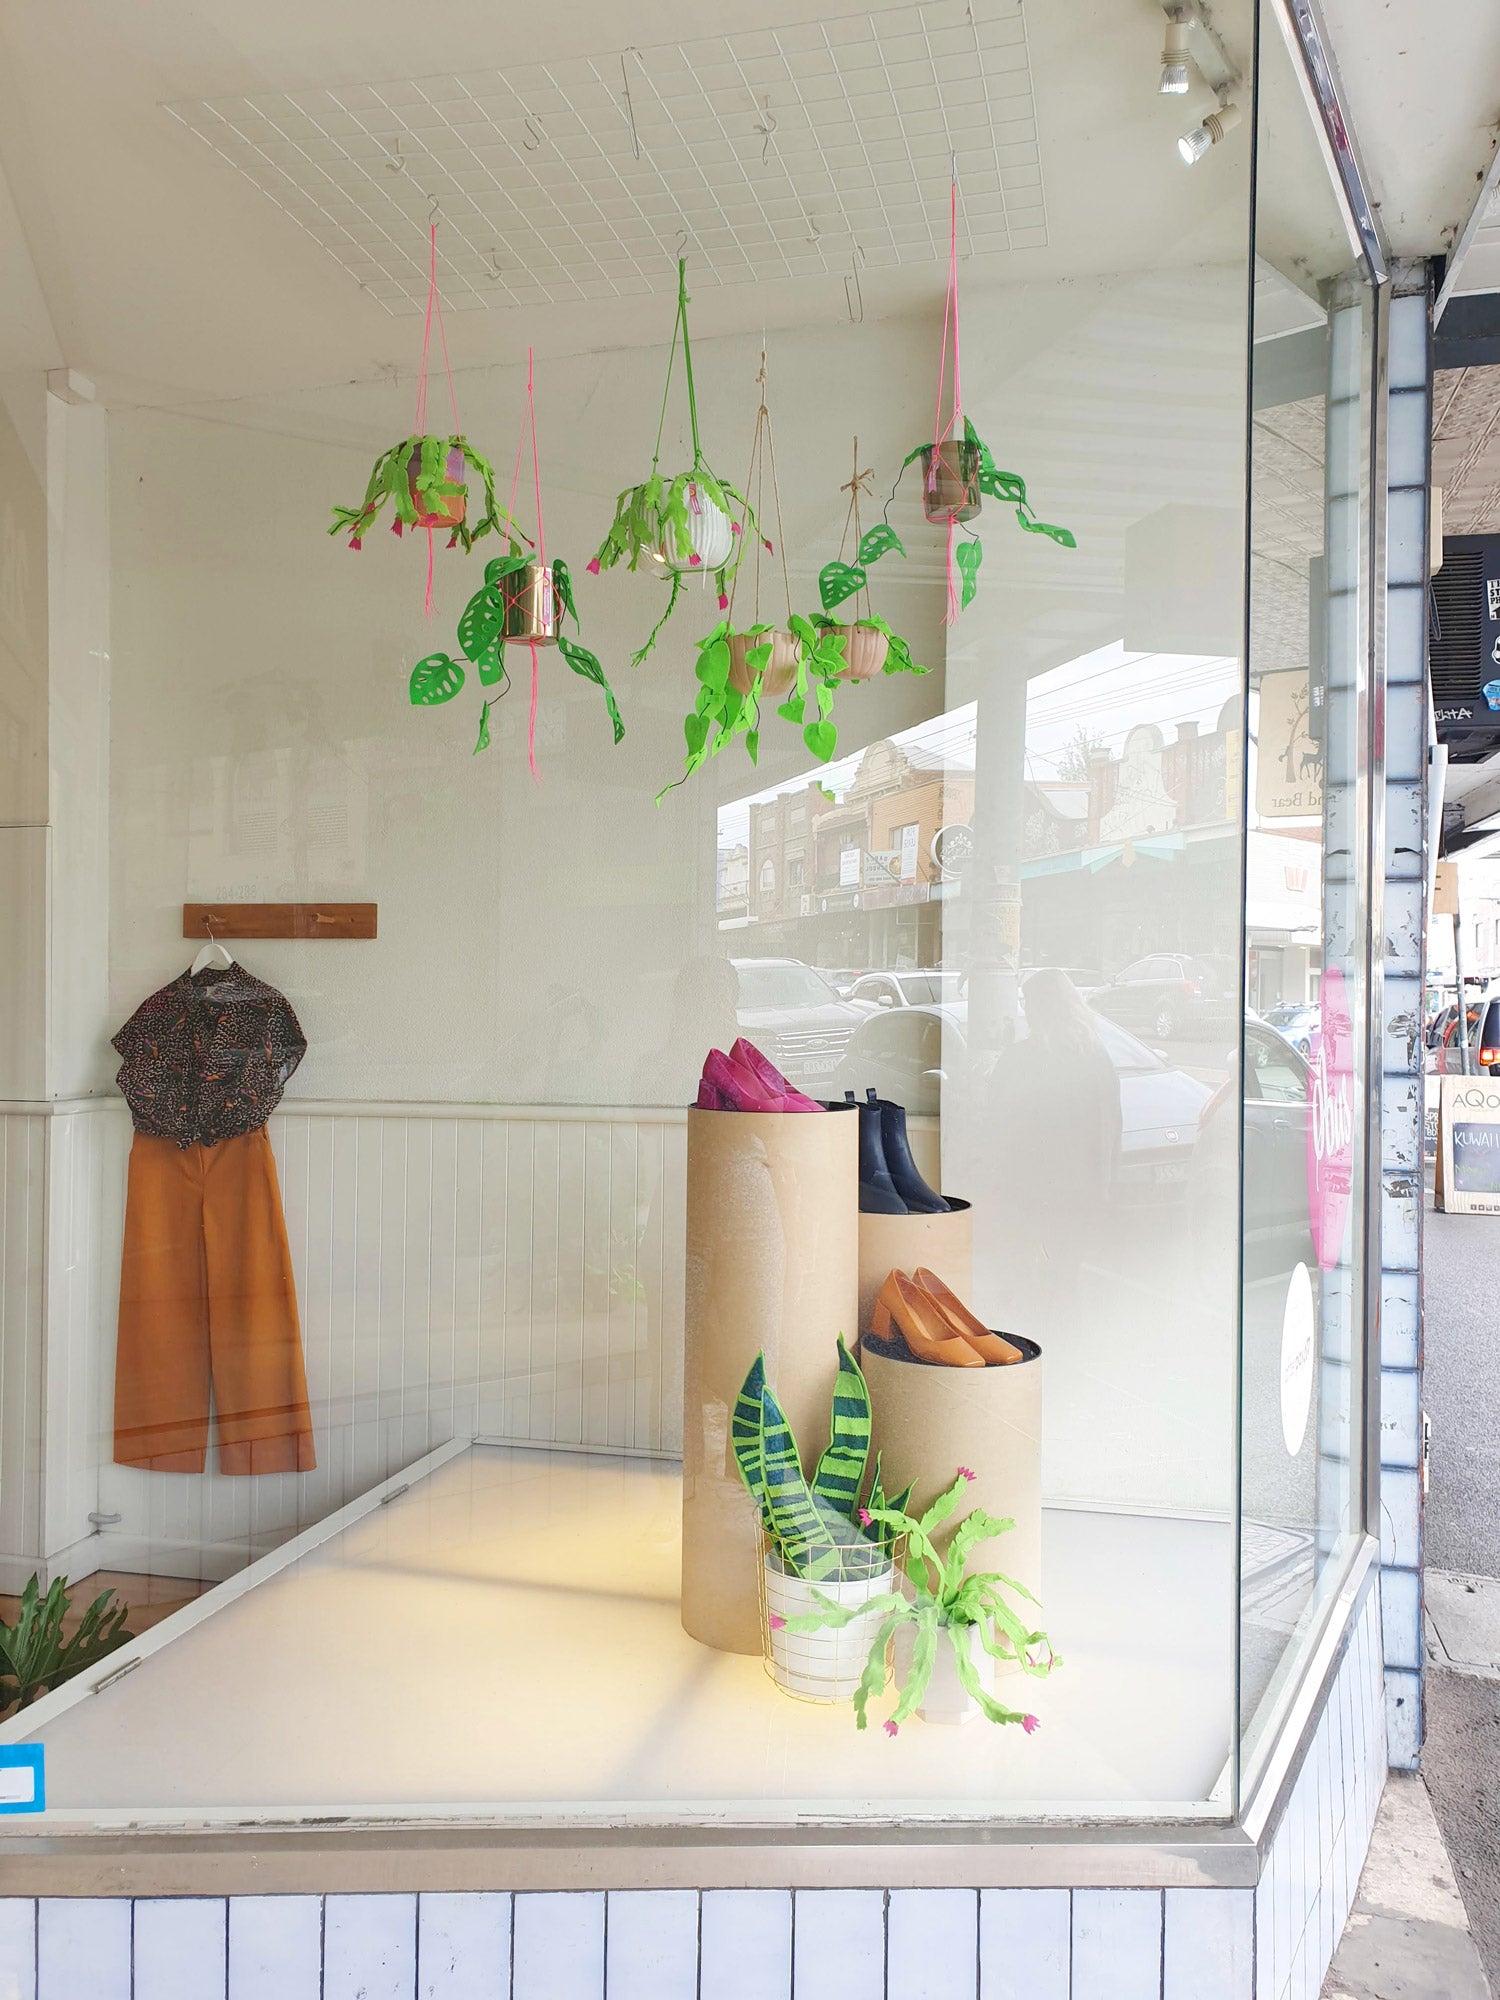 A collection of handmade felt indoor plant props in pots decorate the windows and shelves of a colourful clothing store.